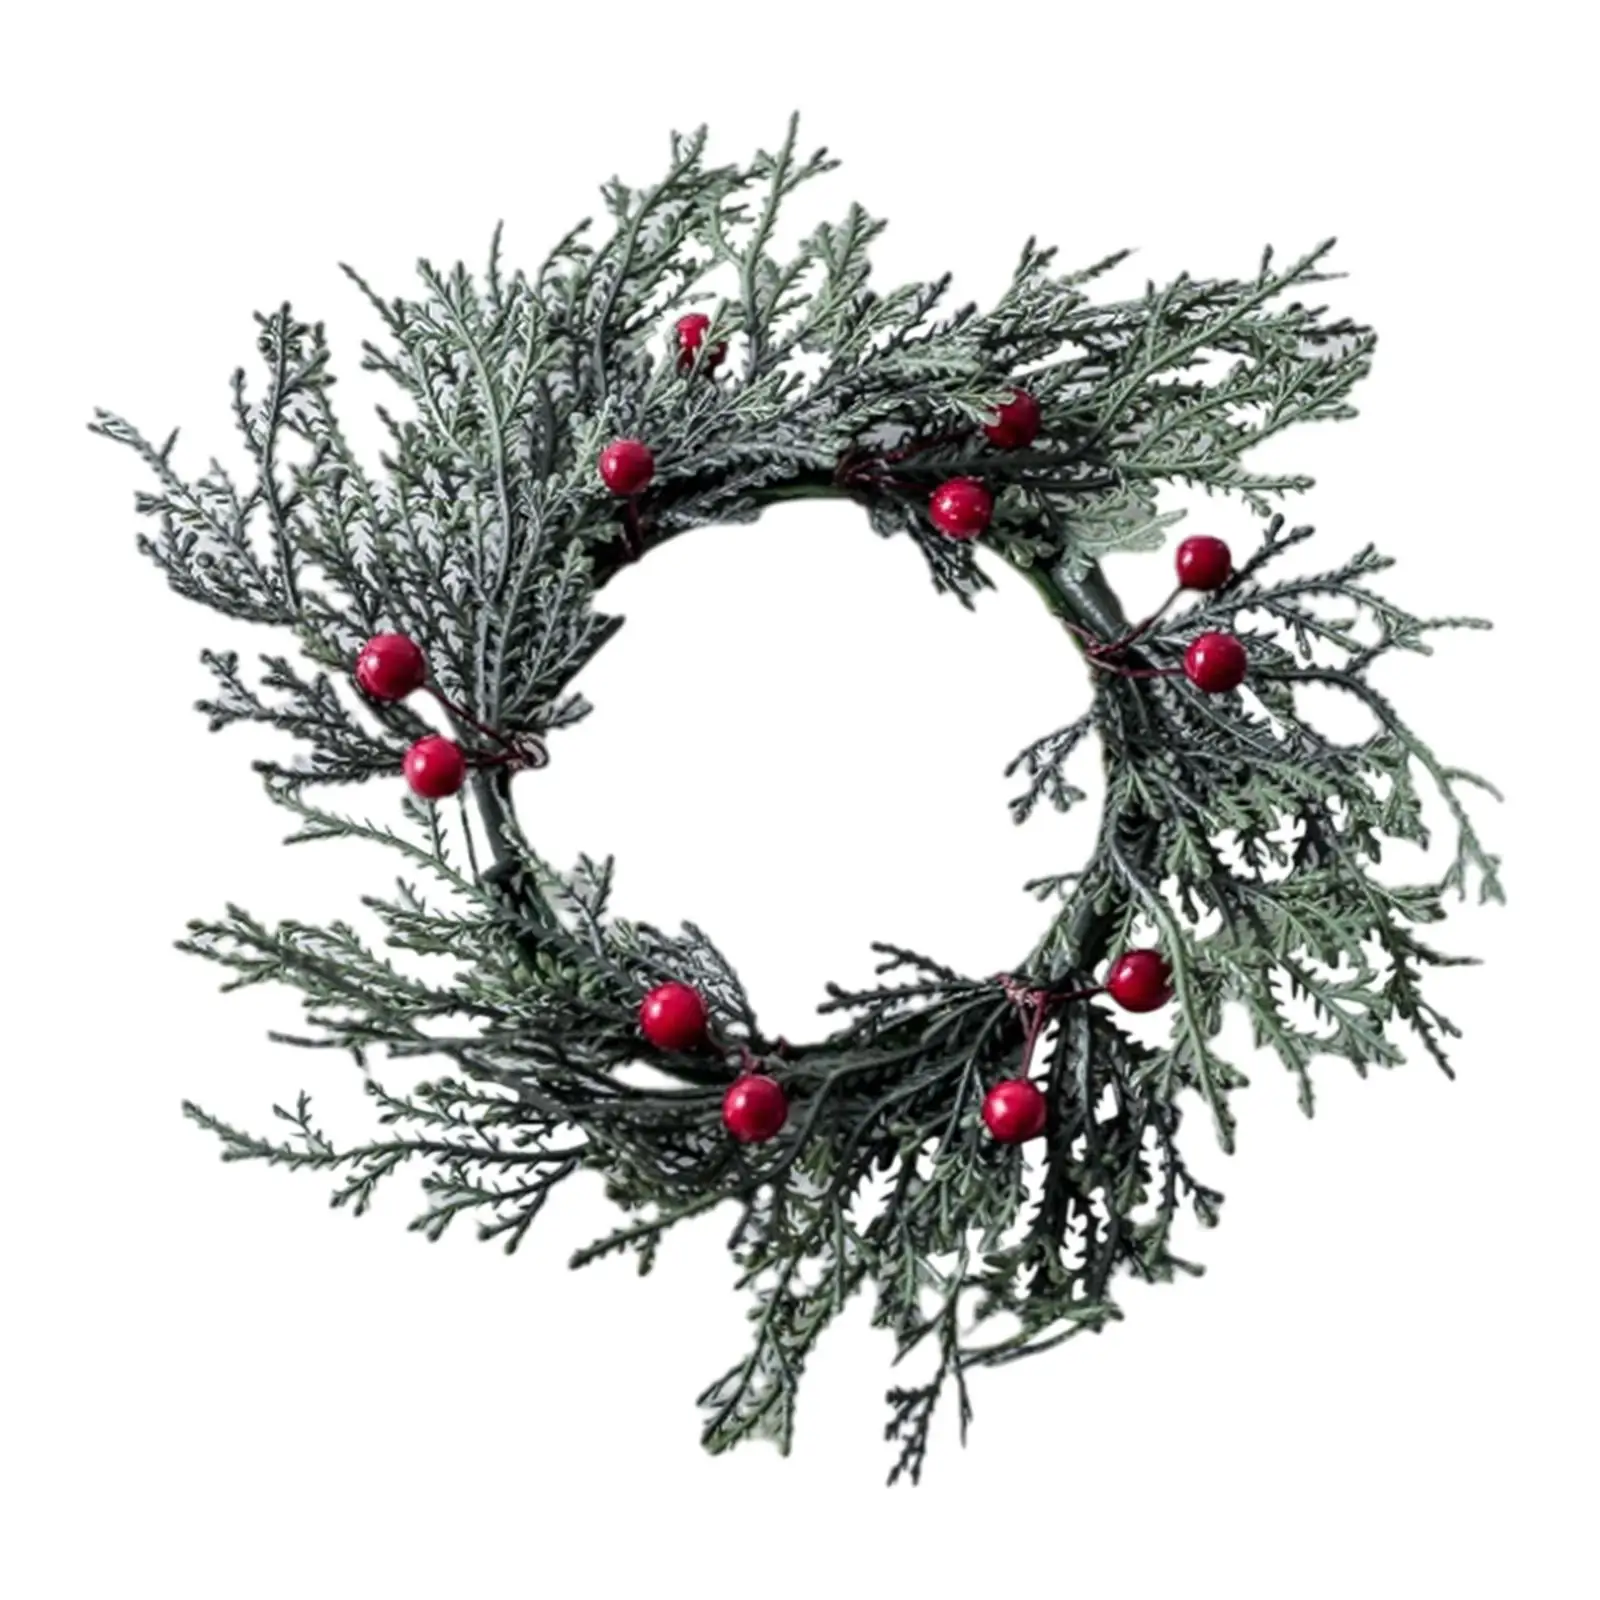 Christmas Candle Ring 8inch Artificial Wreath Christmas Garland Ornament for Pillars Farmhouse Holiday Party Home Table Decor